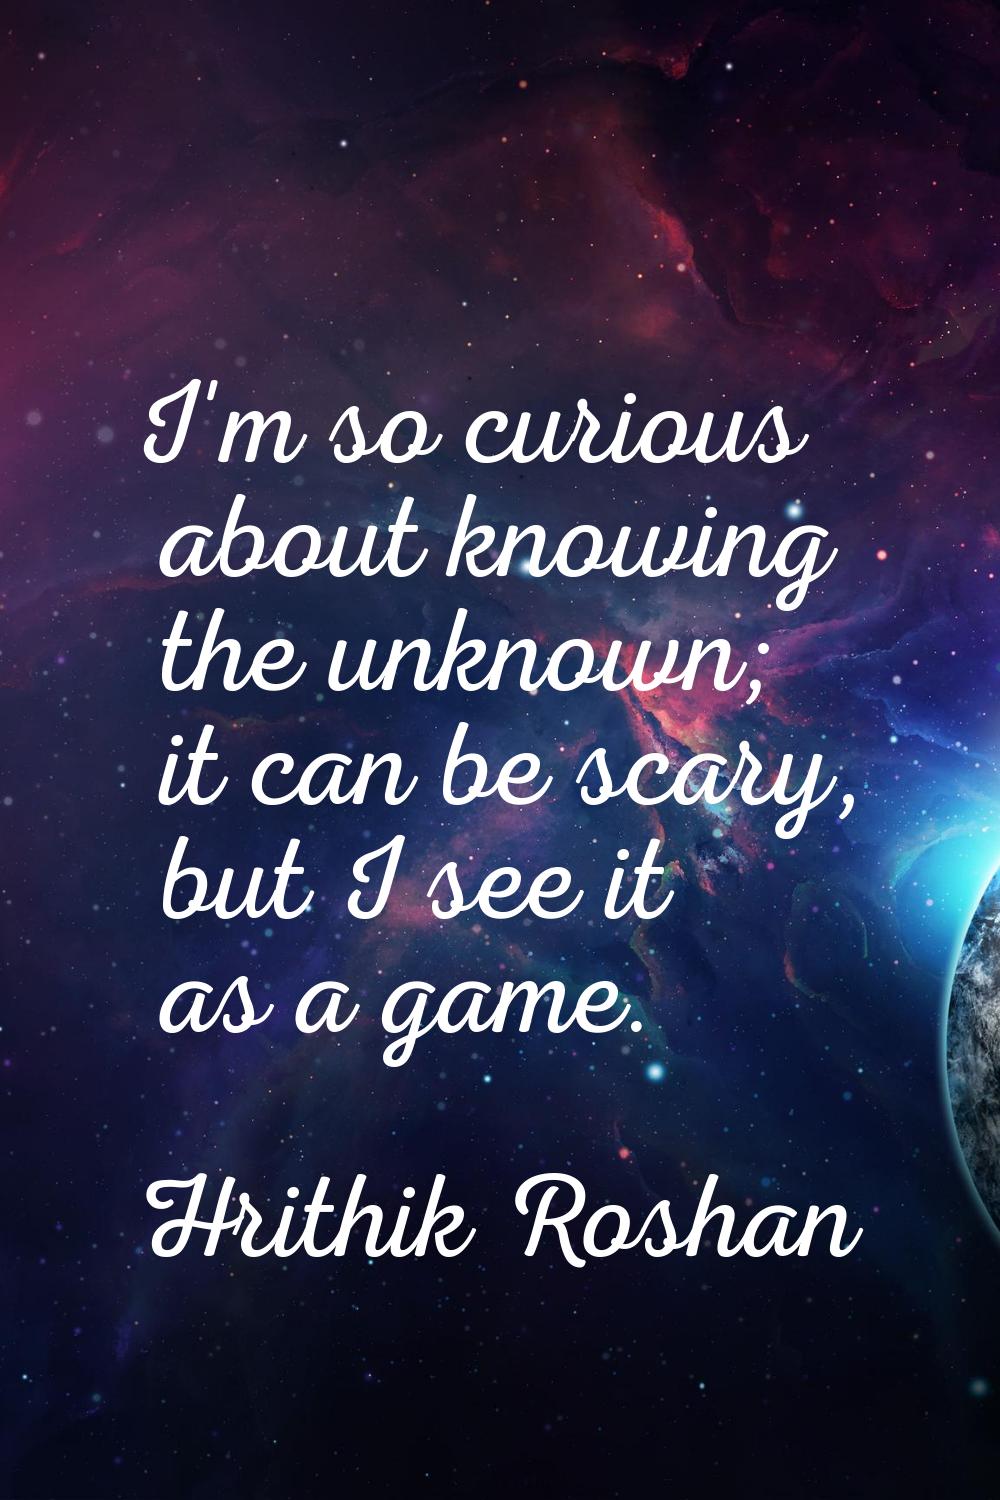 I'm so curious about knowing the unknown; it can be scary, but I see it as a game.